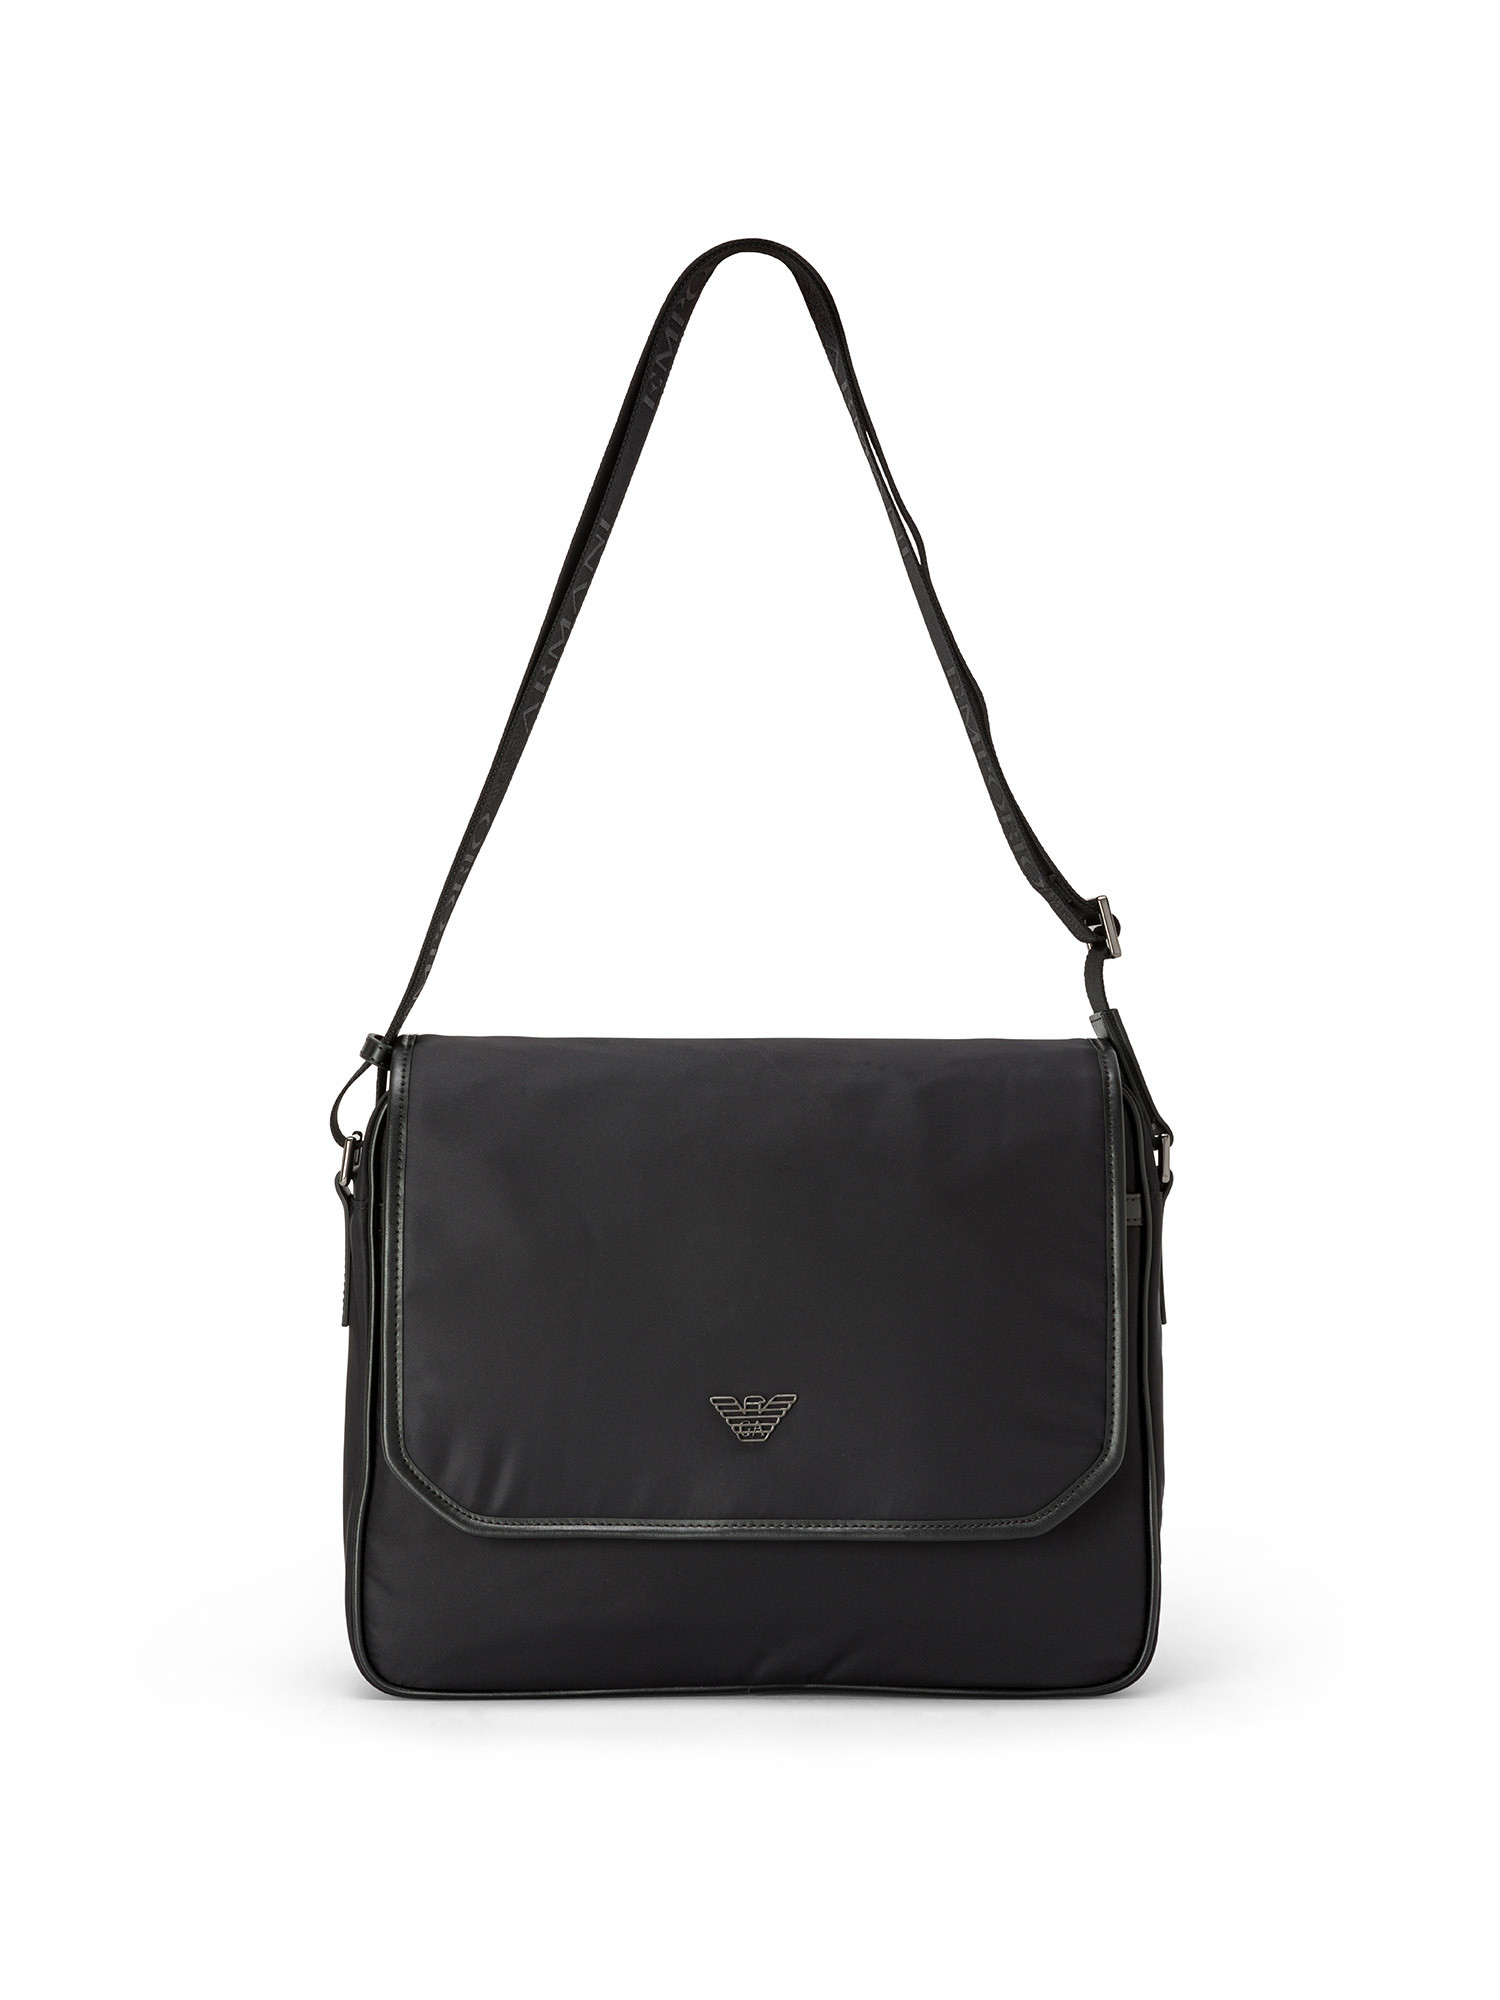 Emporio Armani - Bag in recycled nylon with logo, Black, large image number 0